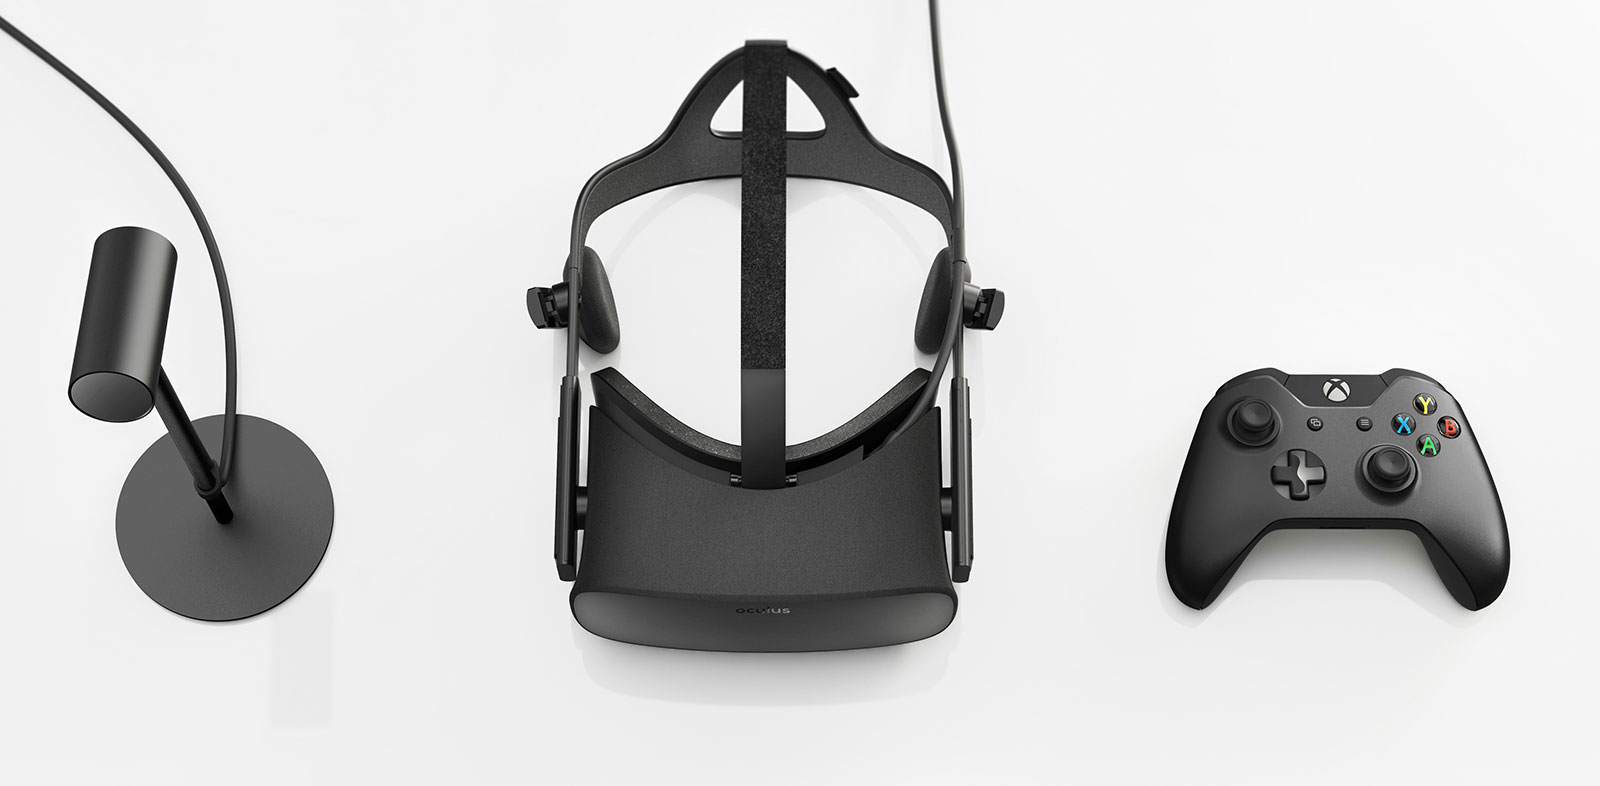 Oculus cuts the cost of VR, builds a mobile Rift - Pickr